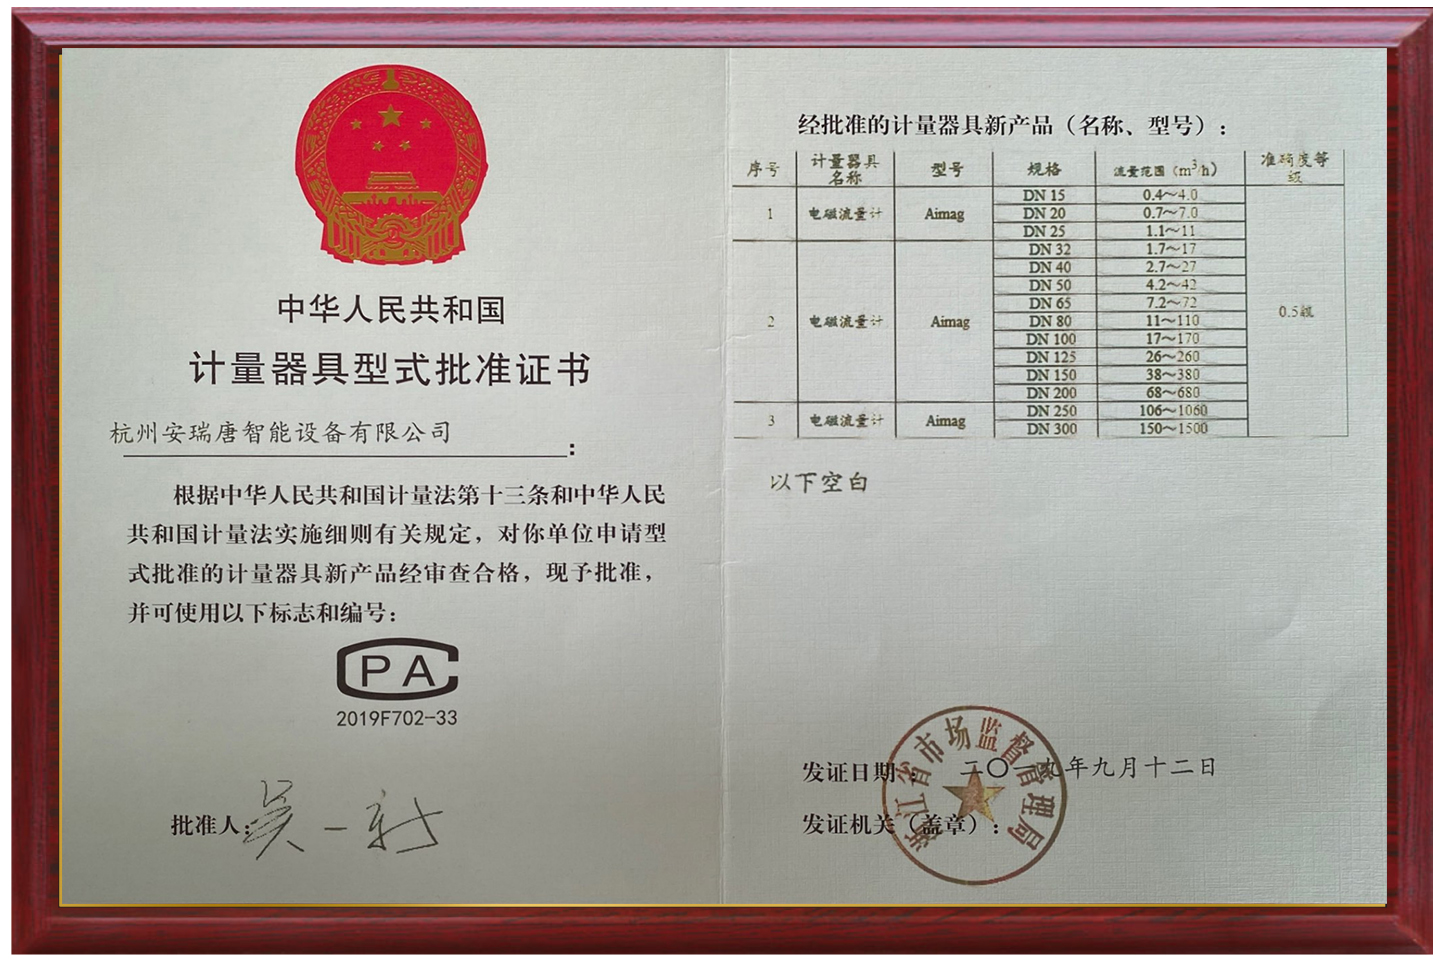 Measuring Instrument Approval Certificate